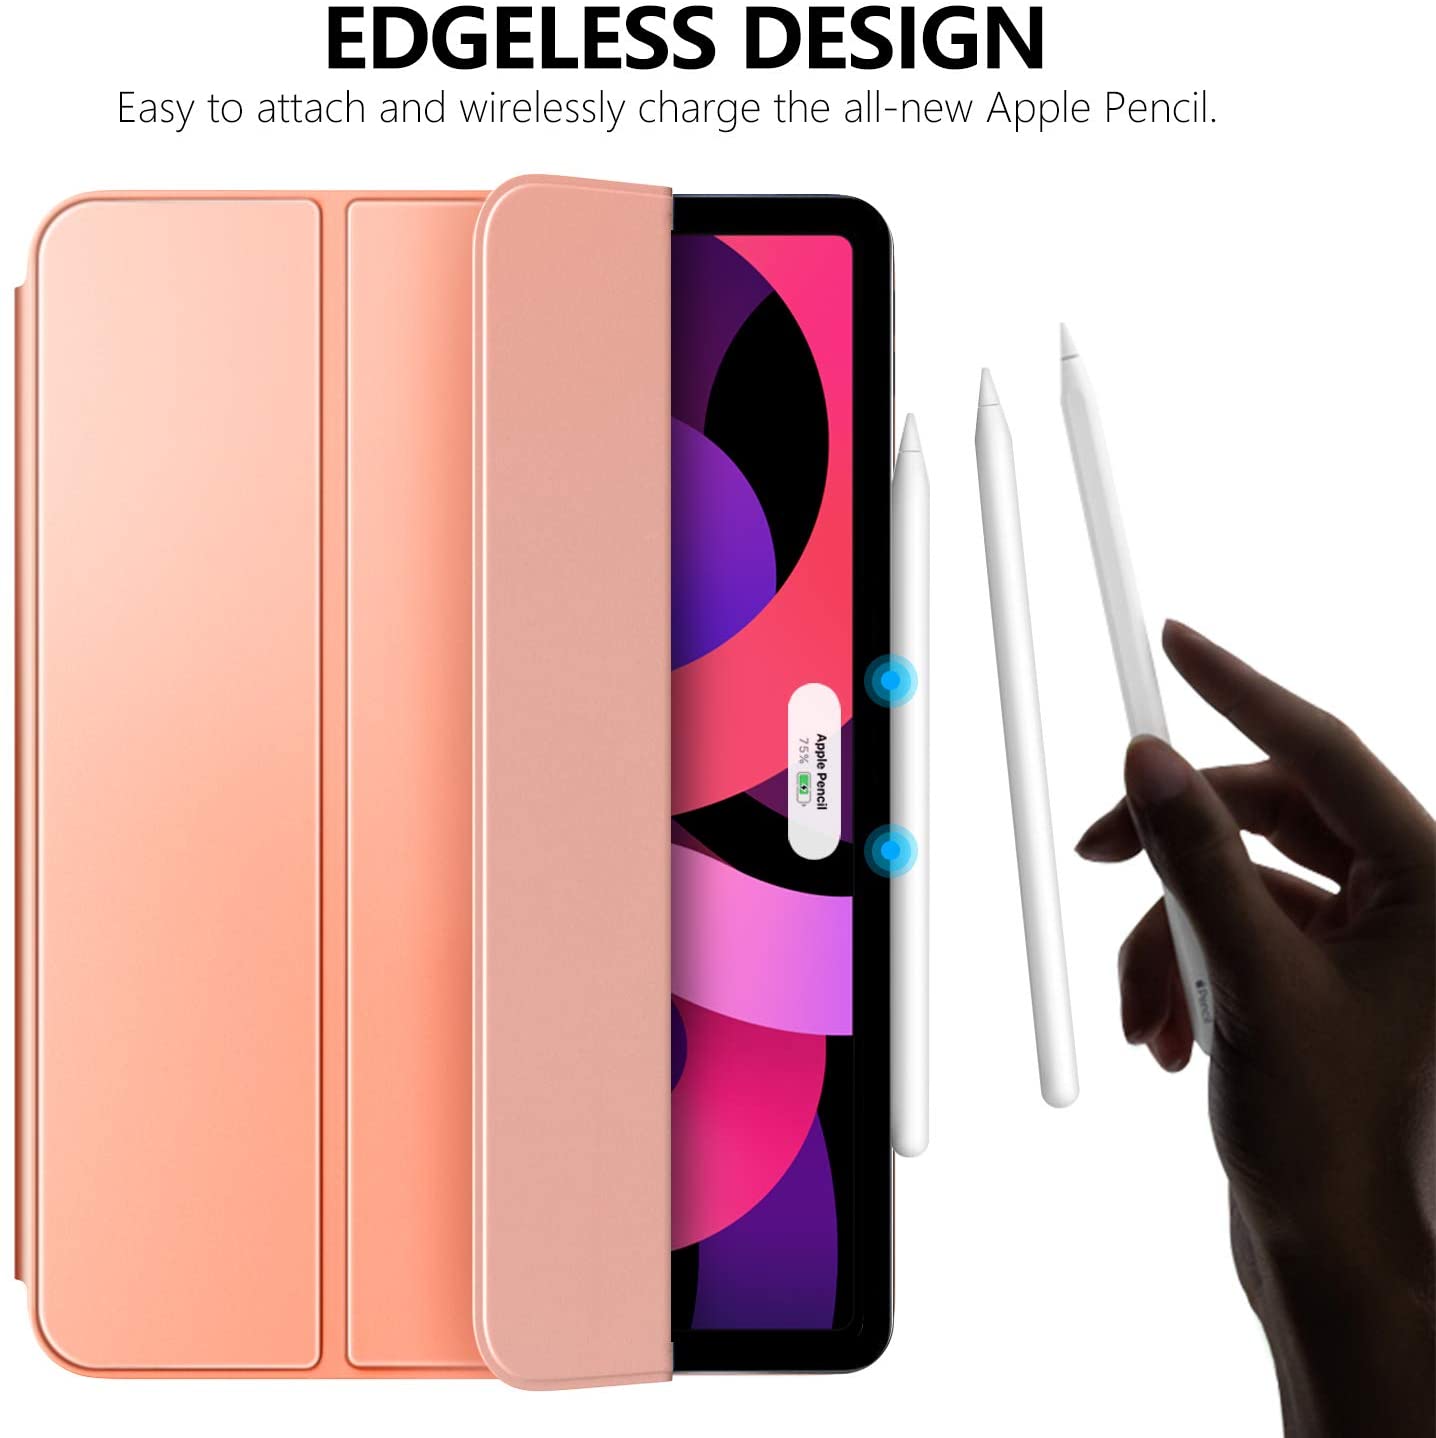 MoKo Magnetic Case Fit New iPad Air 4th Generation 2020 (iPad 10.9 Case)/iPad Pro 11" 2018 - Slim Lightweight Smart Folding Stand Folio Cover - ROSE GOLD - e4cents